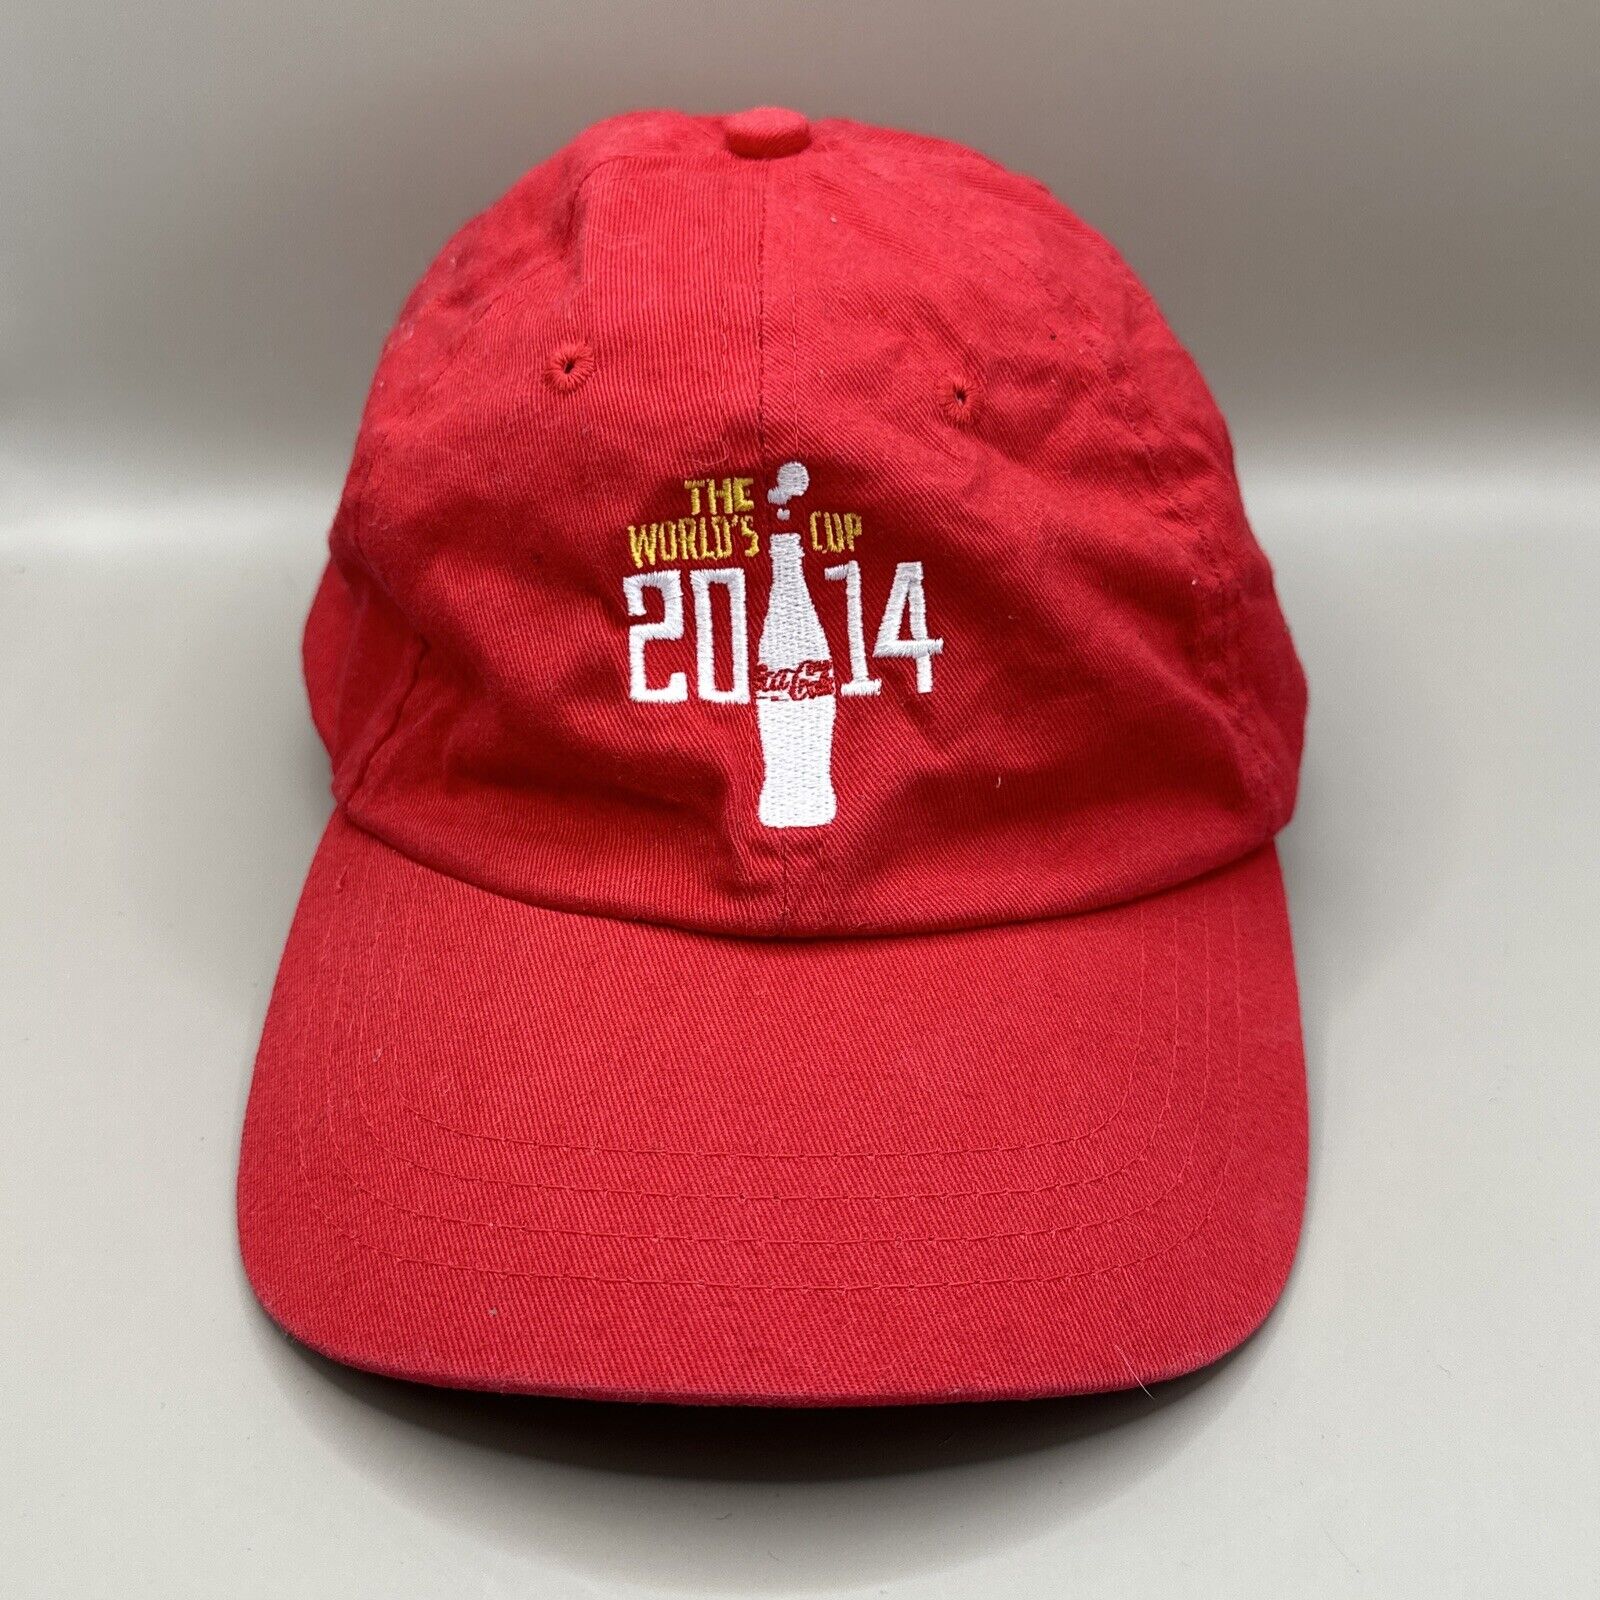 Rare The World’s Cup 2014 Coca-Cola Hat Red Preloved